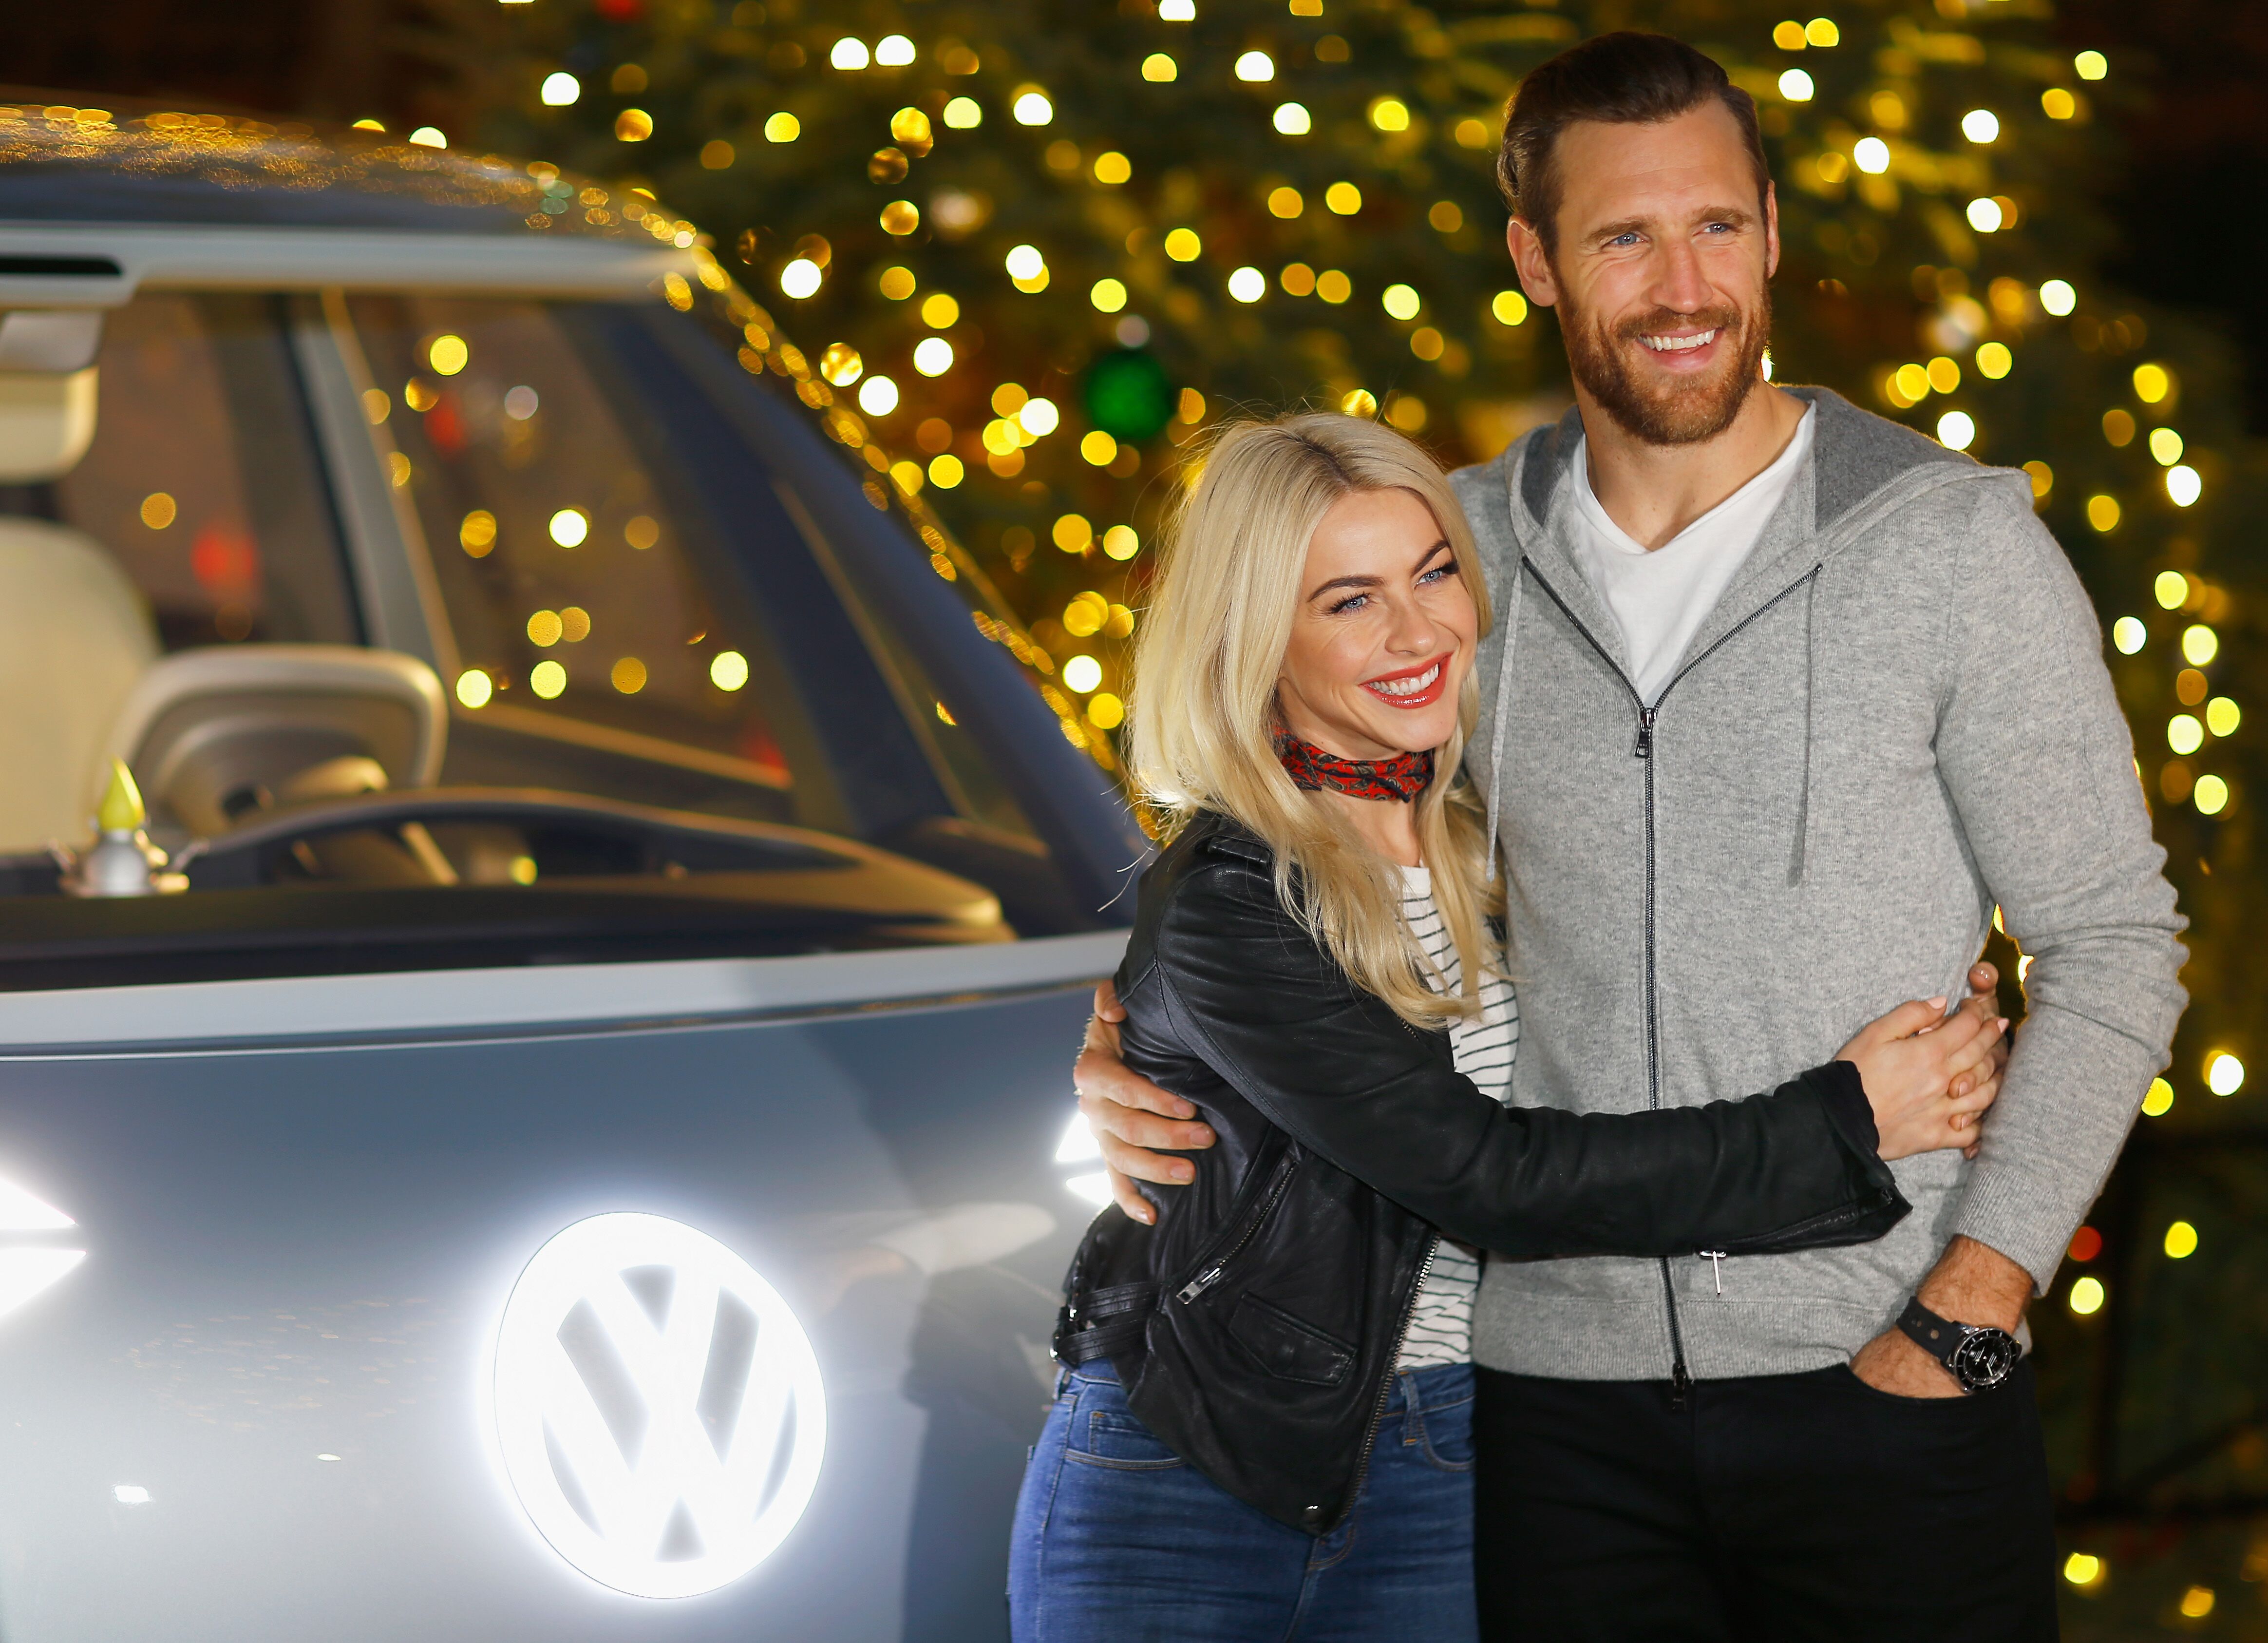 Julianne Hough and Brooks Laich at the Volkswagen Holiday Drive-In Event in Los Angeles, California on December 16, 2017 Photo Justin Edmonds/Getty Images